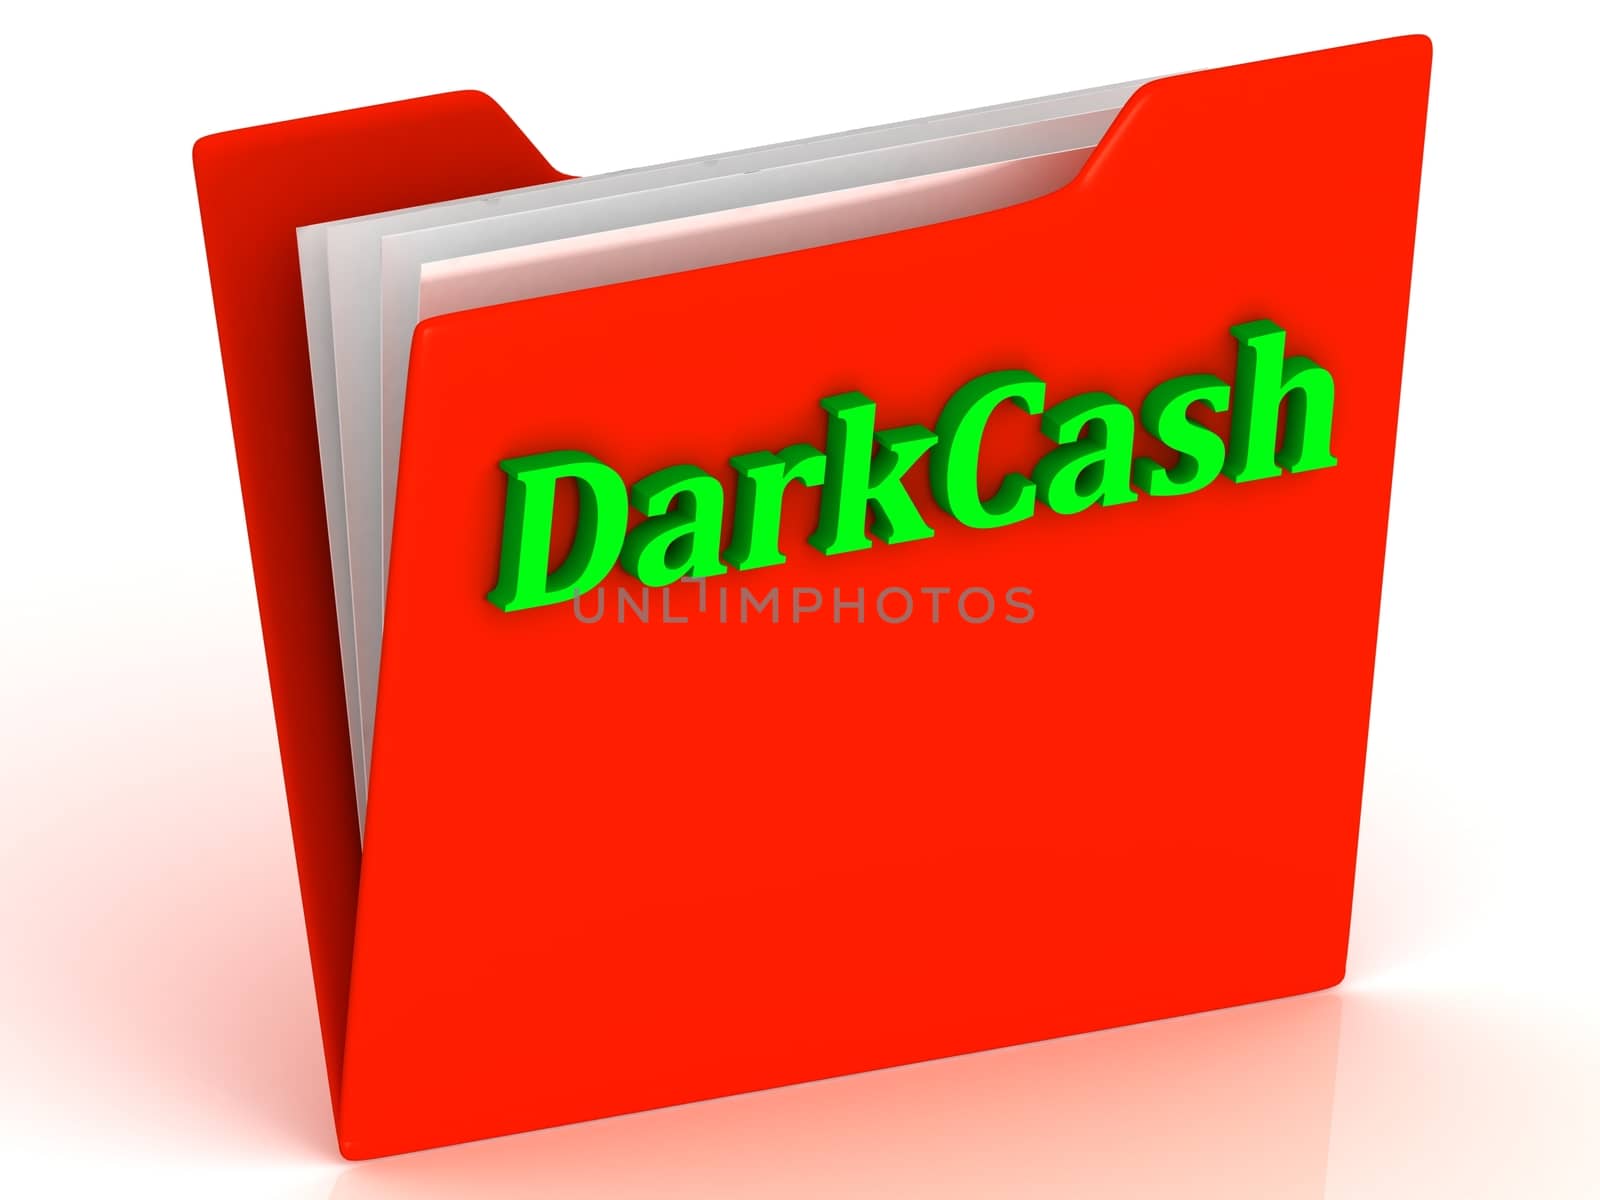 DarkCash- bright green letters on red paperwork folder witch paper list on a white background